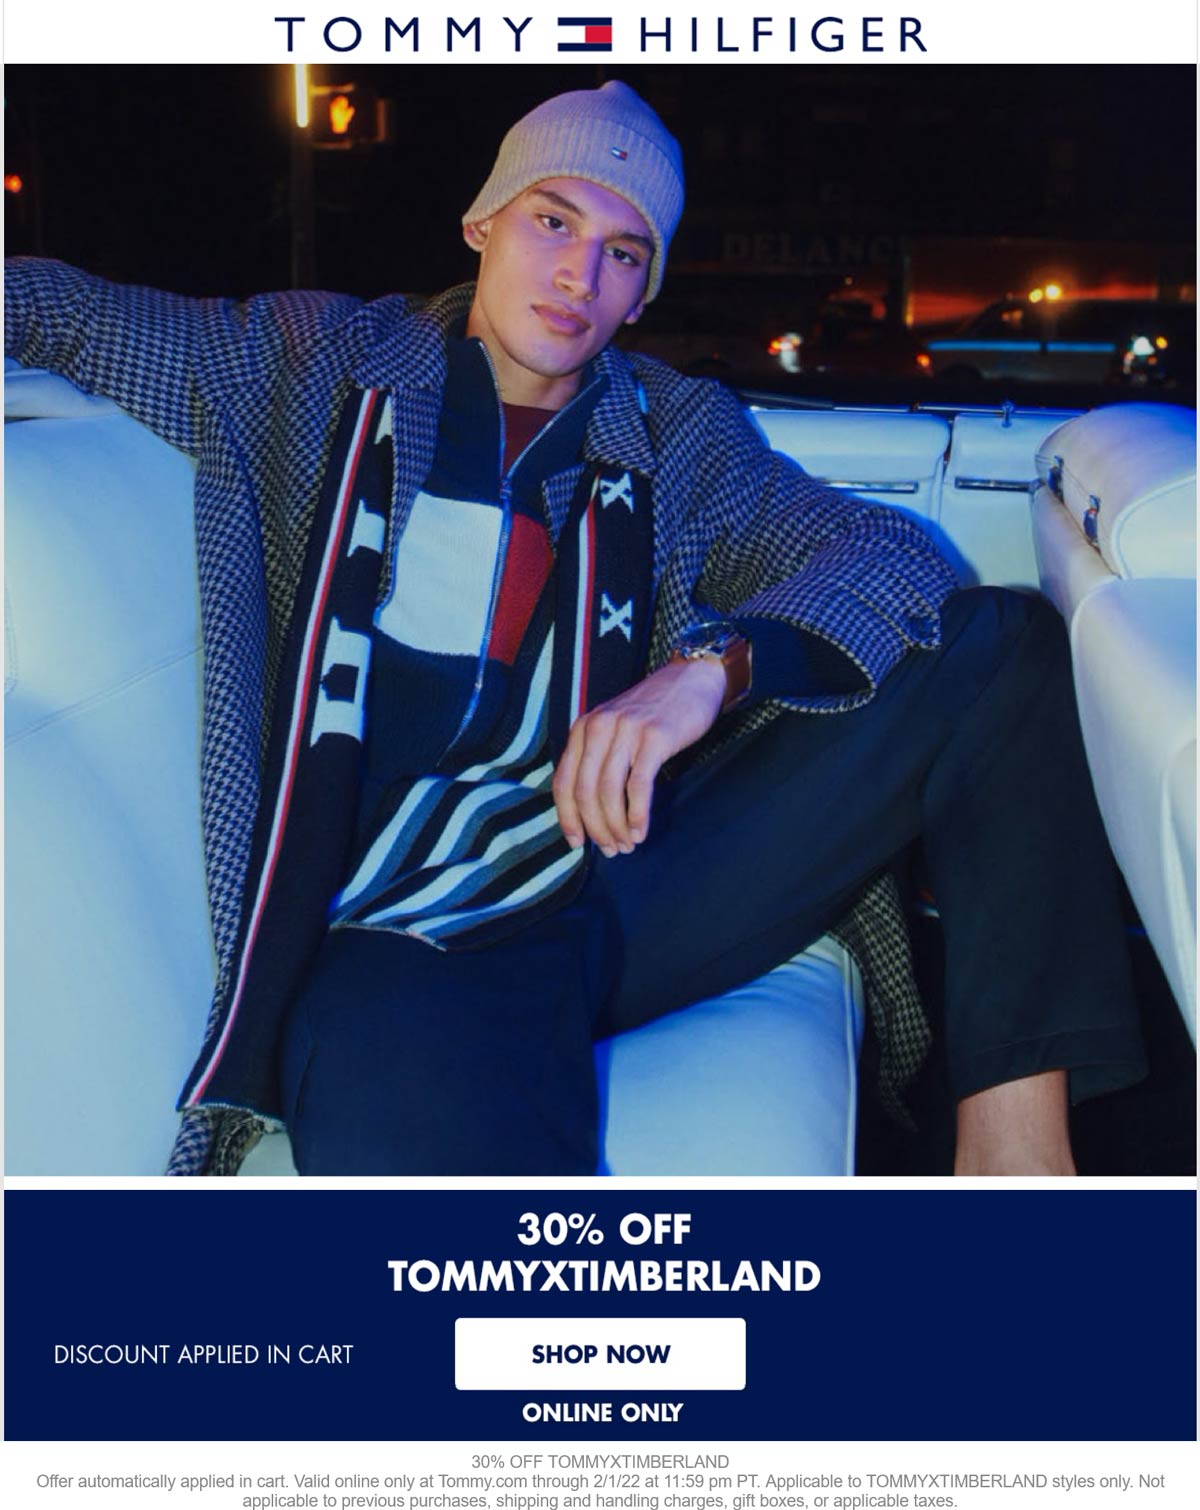 Tommy Hilfiger stores Coupon  30% off TOMMYXTIMERBLAND online at Tommy Hilfiger #tommyhilfiger 